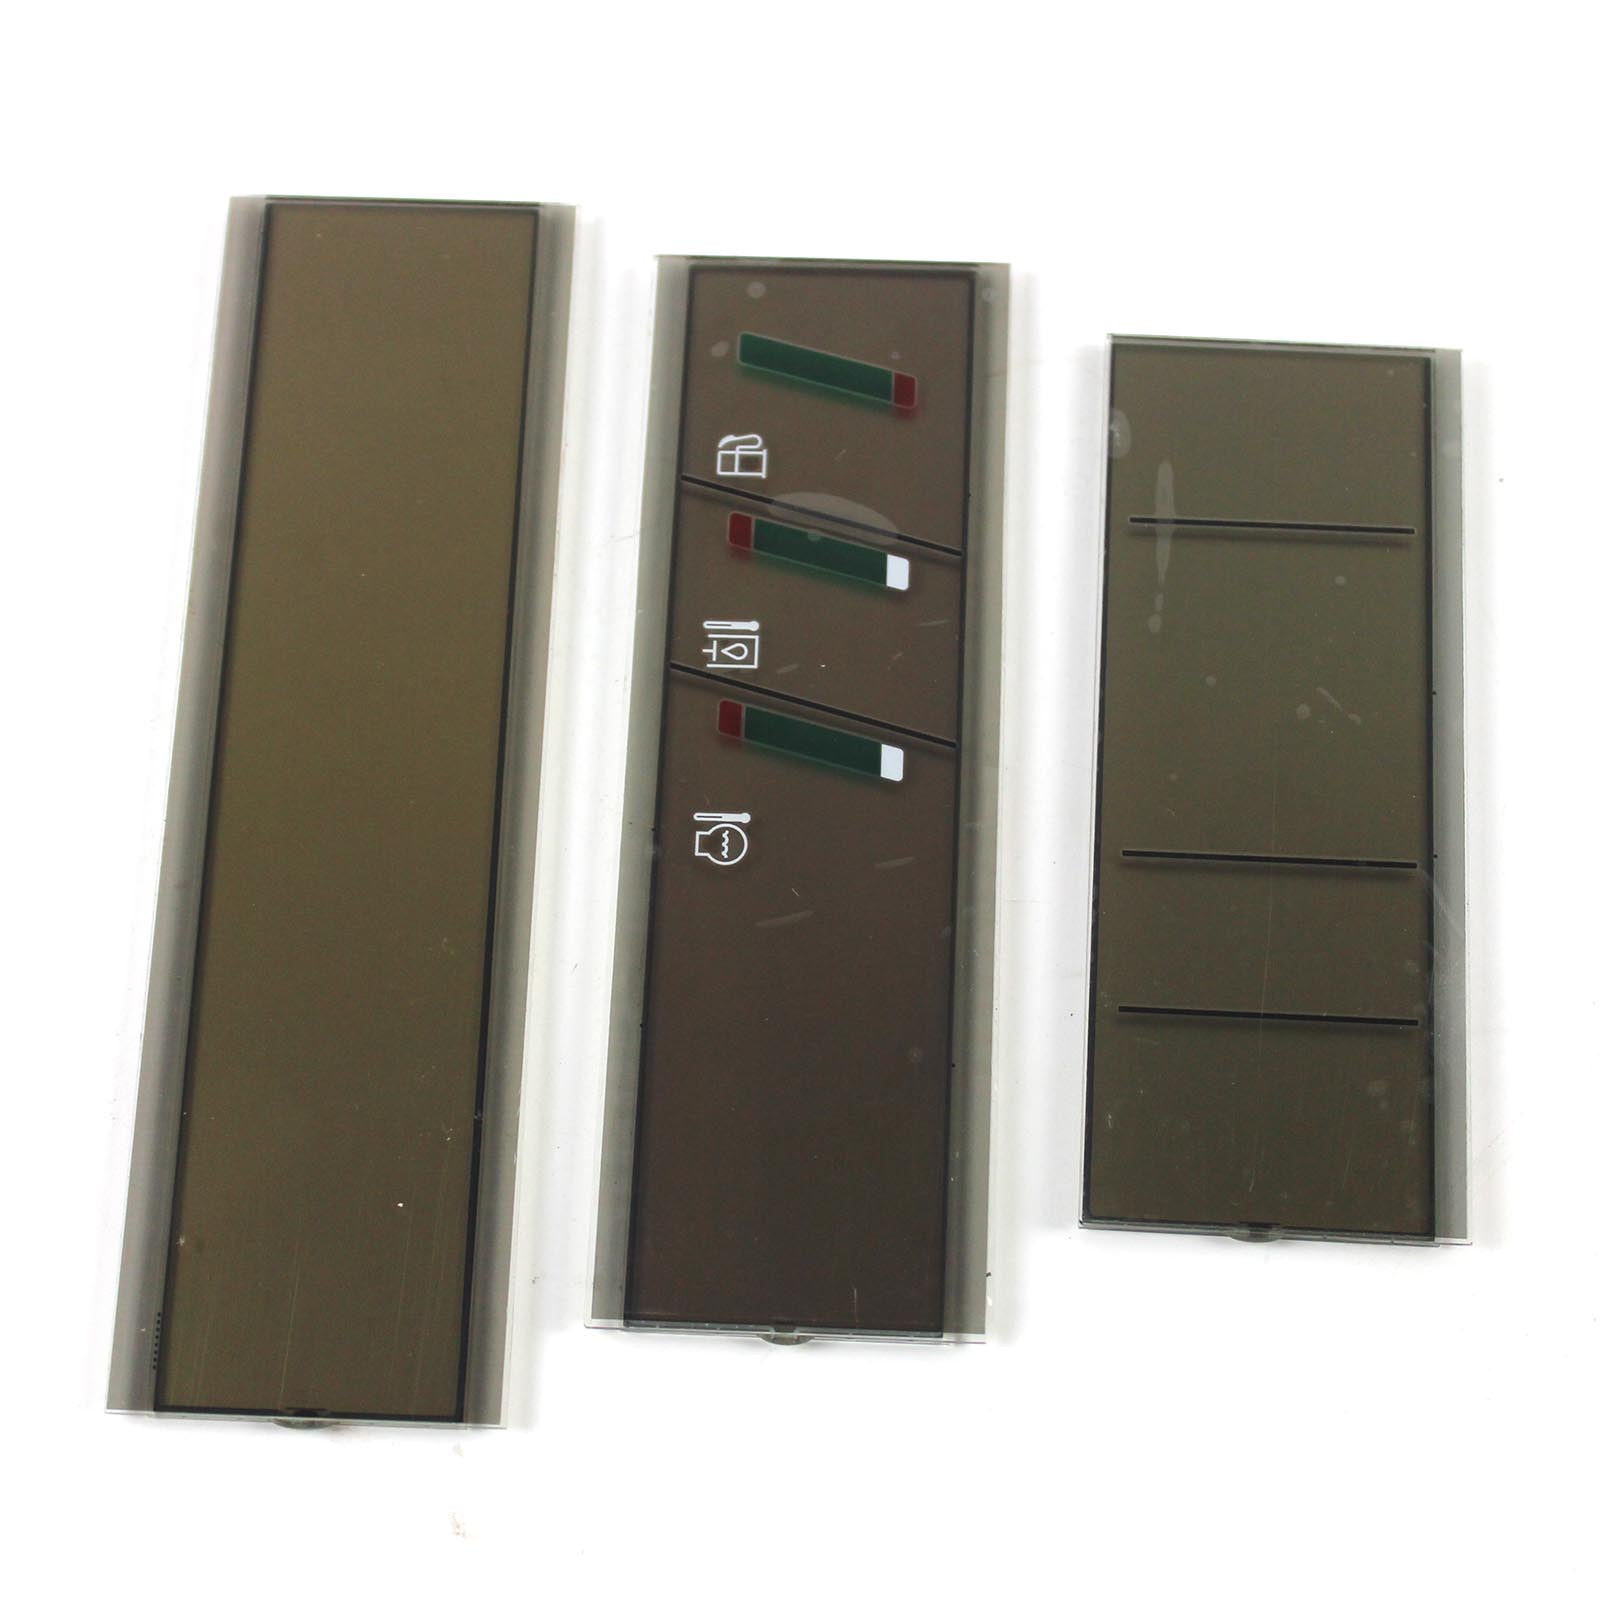 Monitor LCD Panel for Sumitomo A1 A2 SH-1 SH-2  - Sinocmp